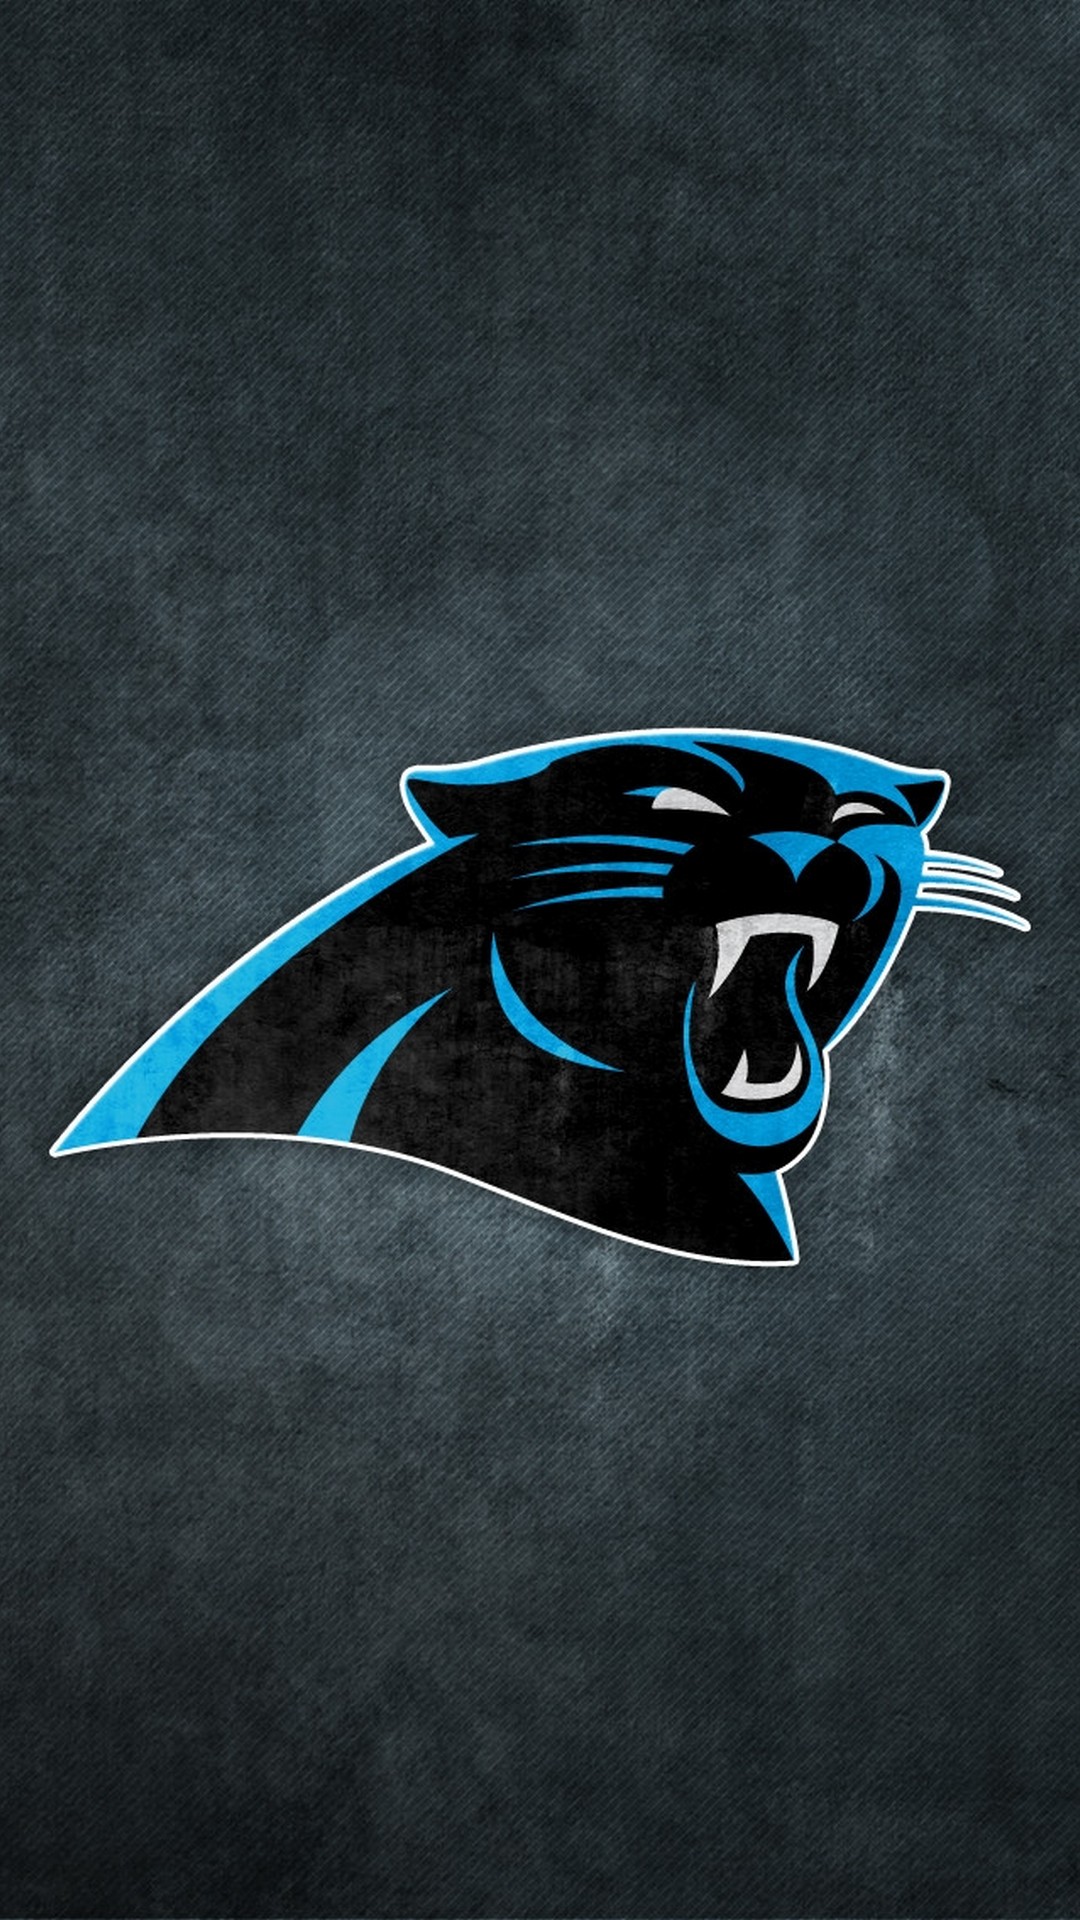 Carolina Panthers iPhone 7 Plus Wallpaper with high-resolution 1080x1920 pixel. Download and set as wallpaper for Apple iPhone X, XS Max, XR, 8, 7, 6, SE, iPad, Android